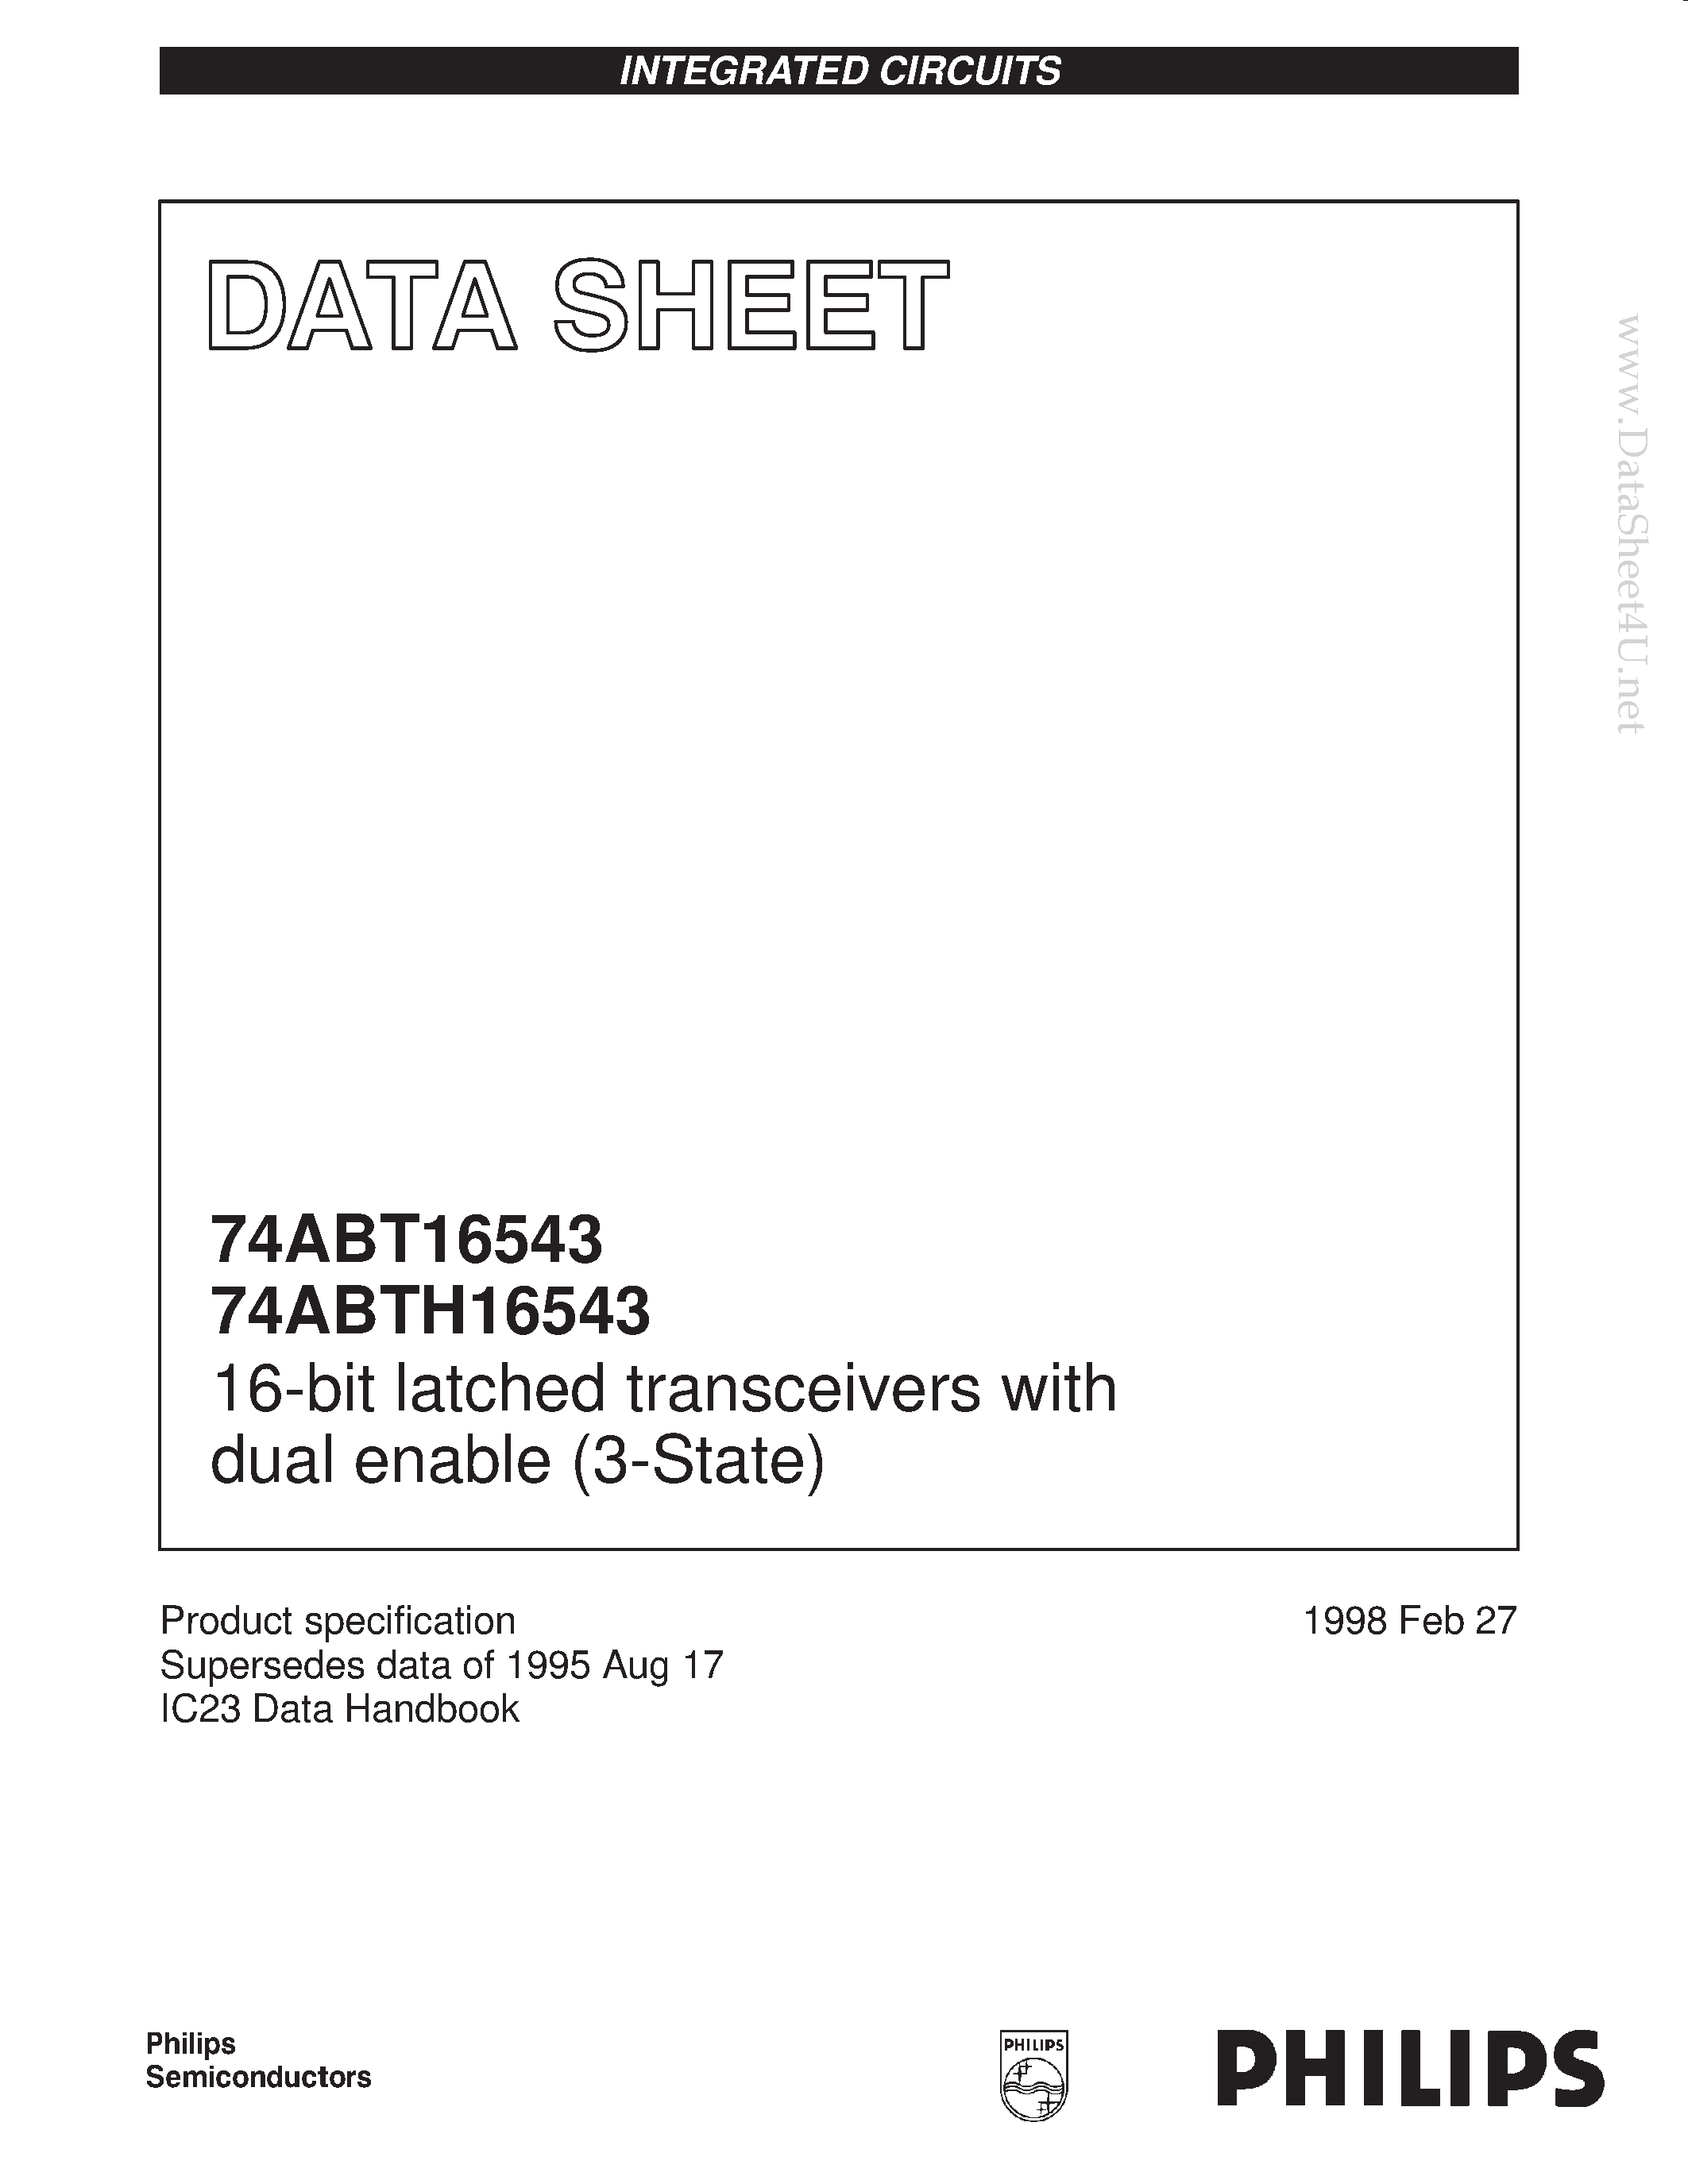 Datasheet 74ABTH16543DL - 16-bit latched transceivers with dual enable 3-State page 1